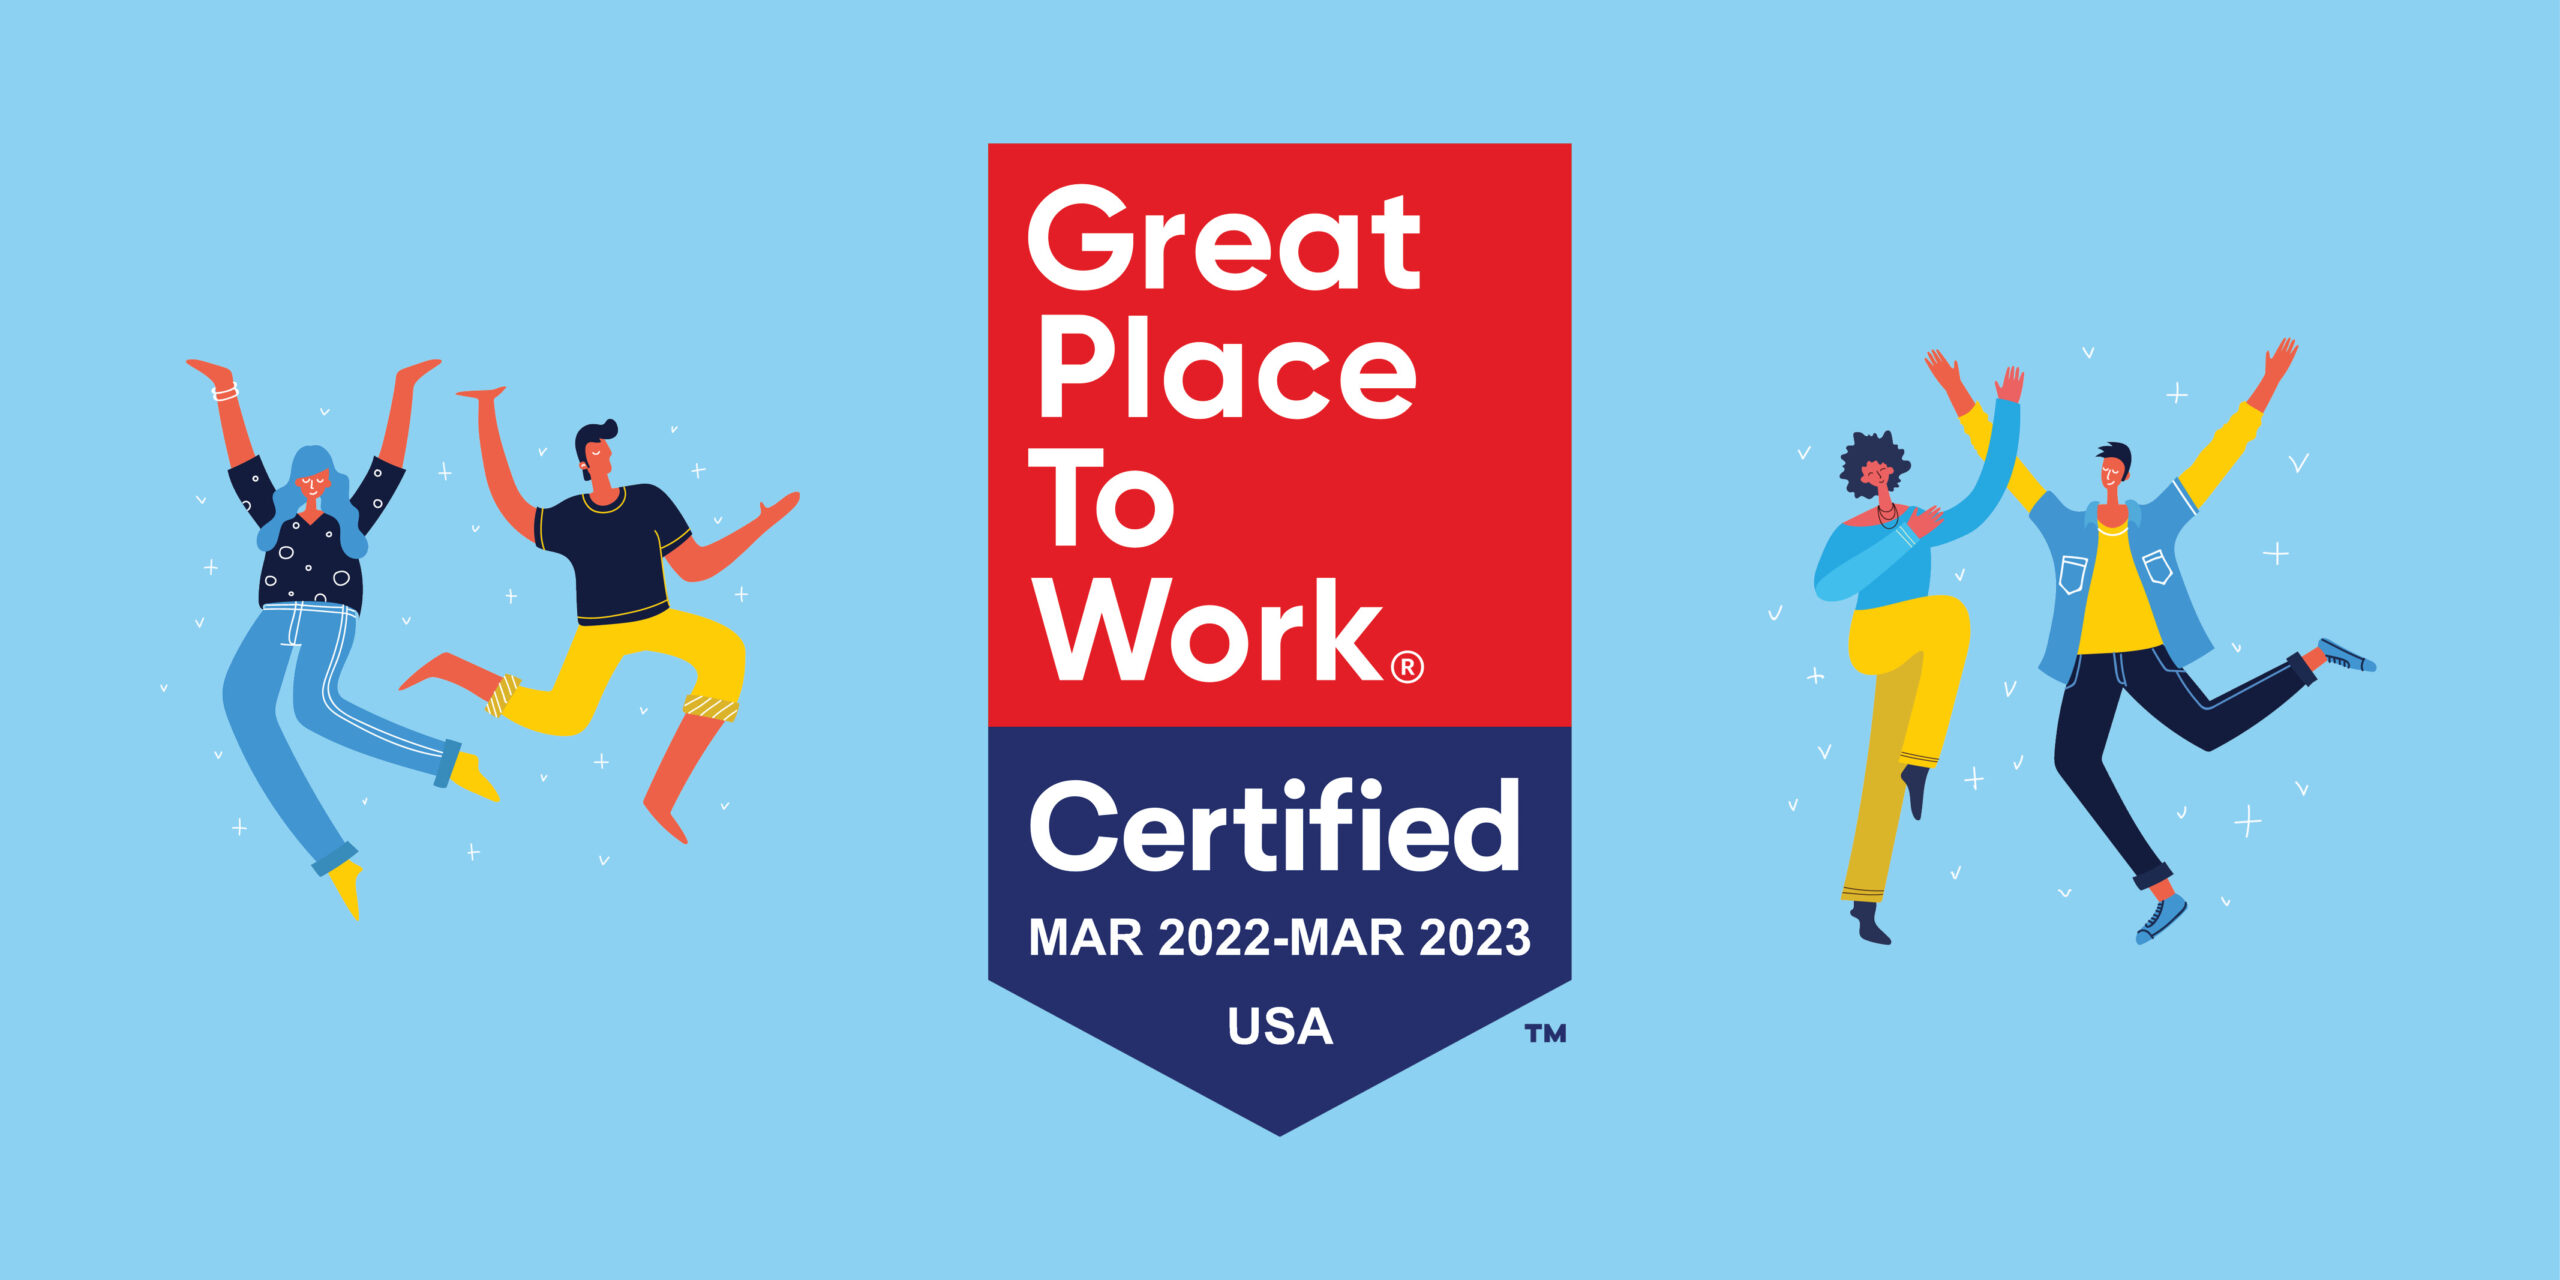 Clark Dietz is Great Place to Work Certified